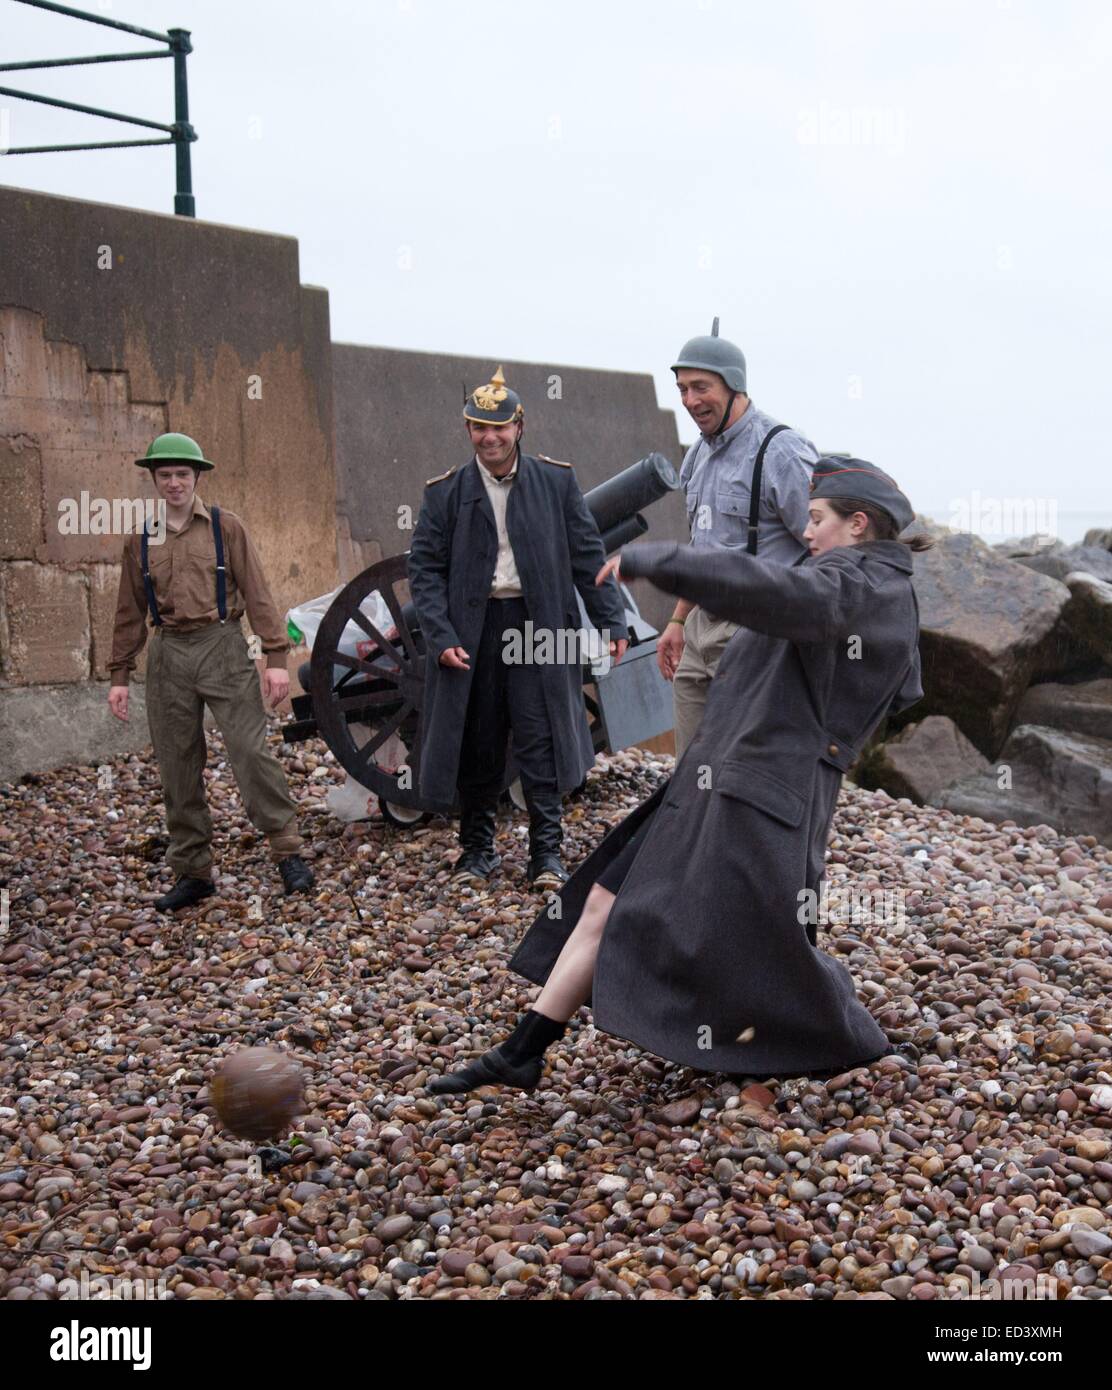 Sidmouth, Devon, UK. 26th December, 2014. WW1 England v Germany soccer match on the beach at Sidmouth, Devon  before the the annual Boxing Day Swim held to raise funds for the RNLI WORLD WAR 1 SOCCER MATCH. Credit:  Tony Charnock/Alamy Live News Stock Photo